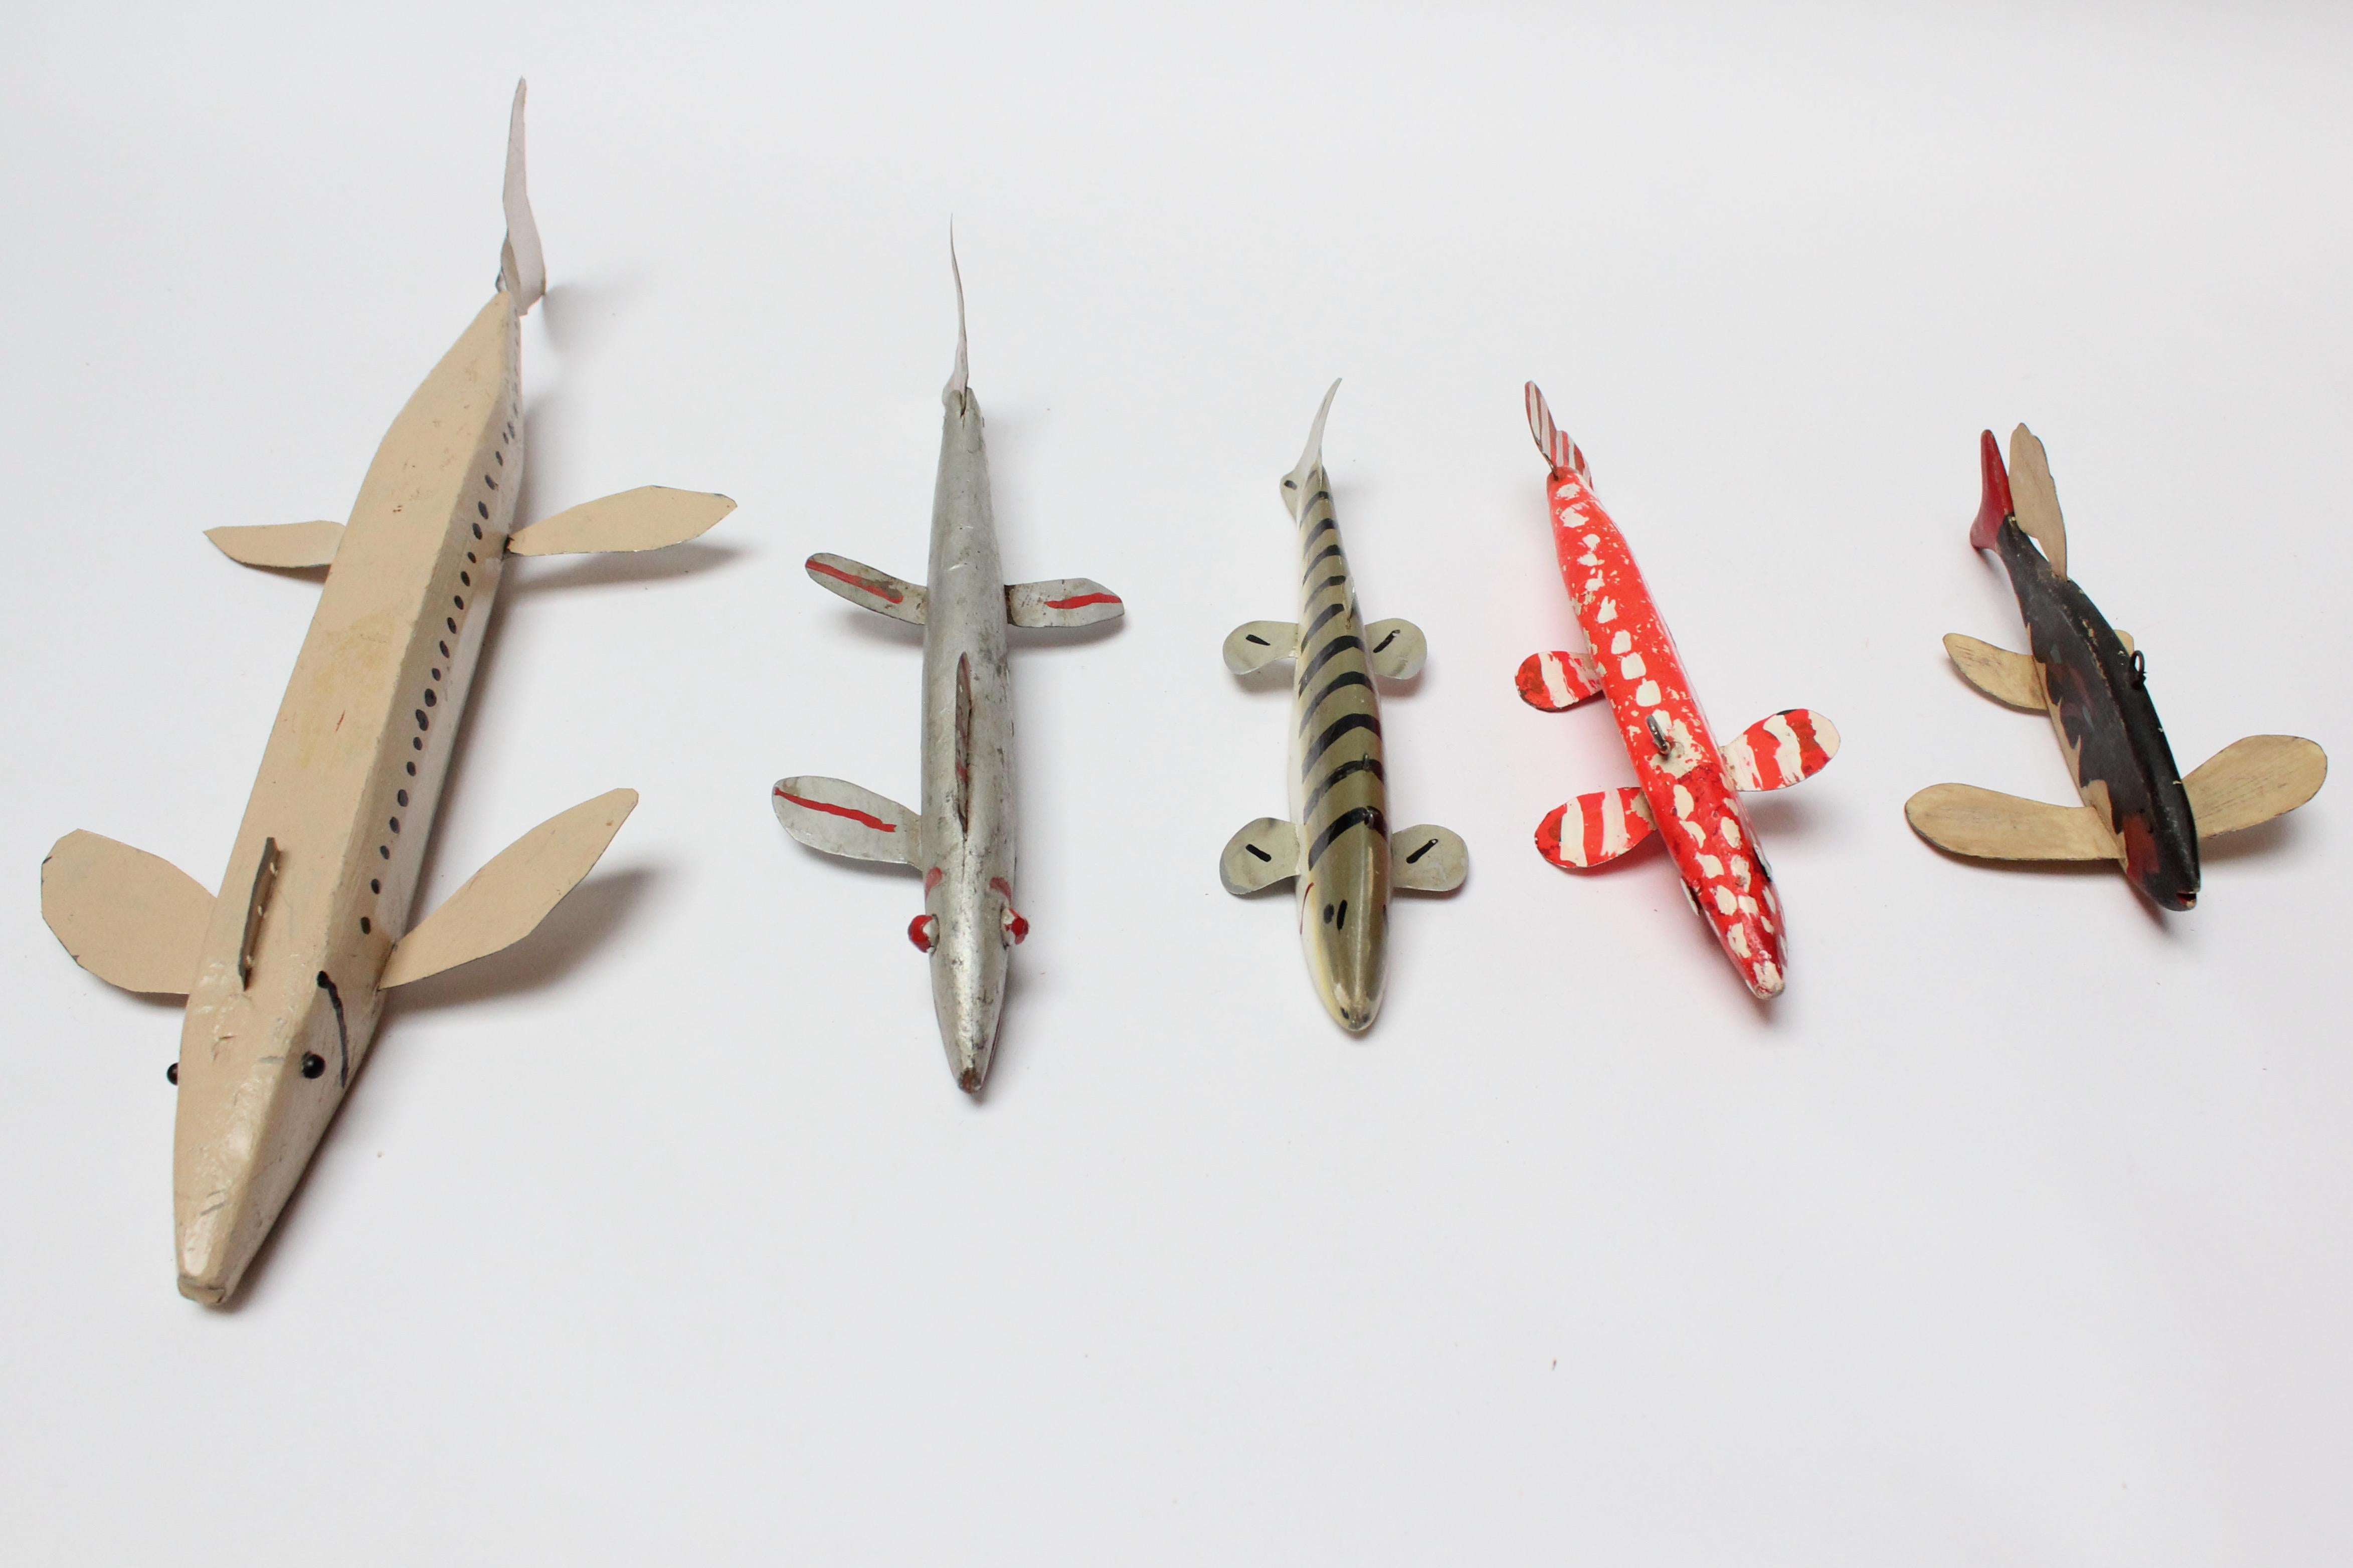 Group of five Folk Art fish decoys composed of painted tinned iron sheet metal or aluminum fins and tails and carved wooden weighted lead bodies, some with applied eyes; others with painted (ca. 1940s-1950, USA). The only non-weighted / all carved